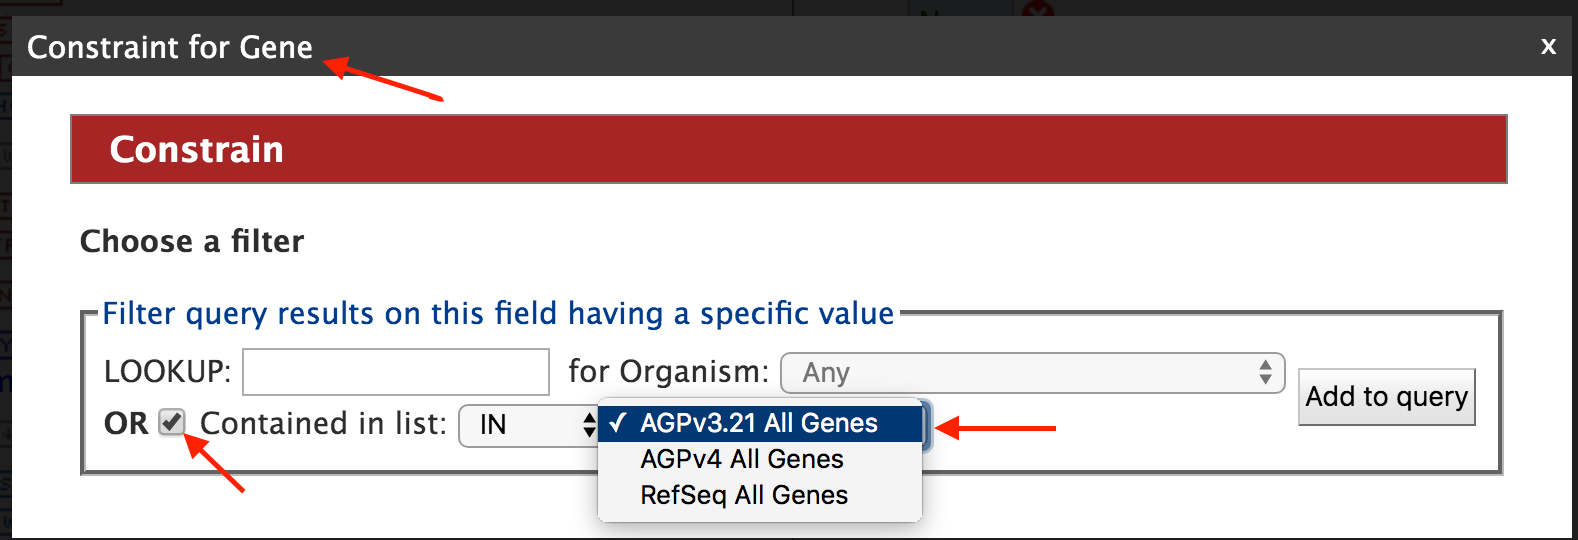 Constraining your search to All AGPv3.21 Genes